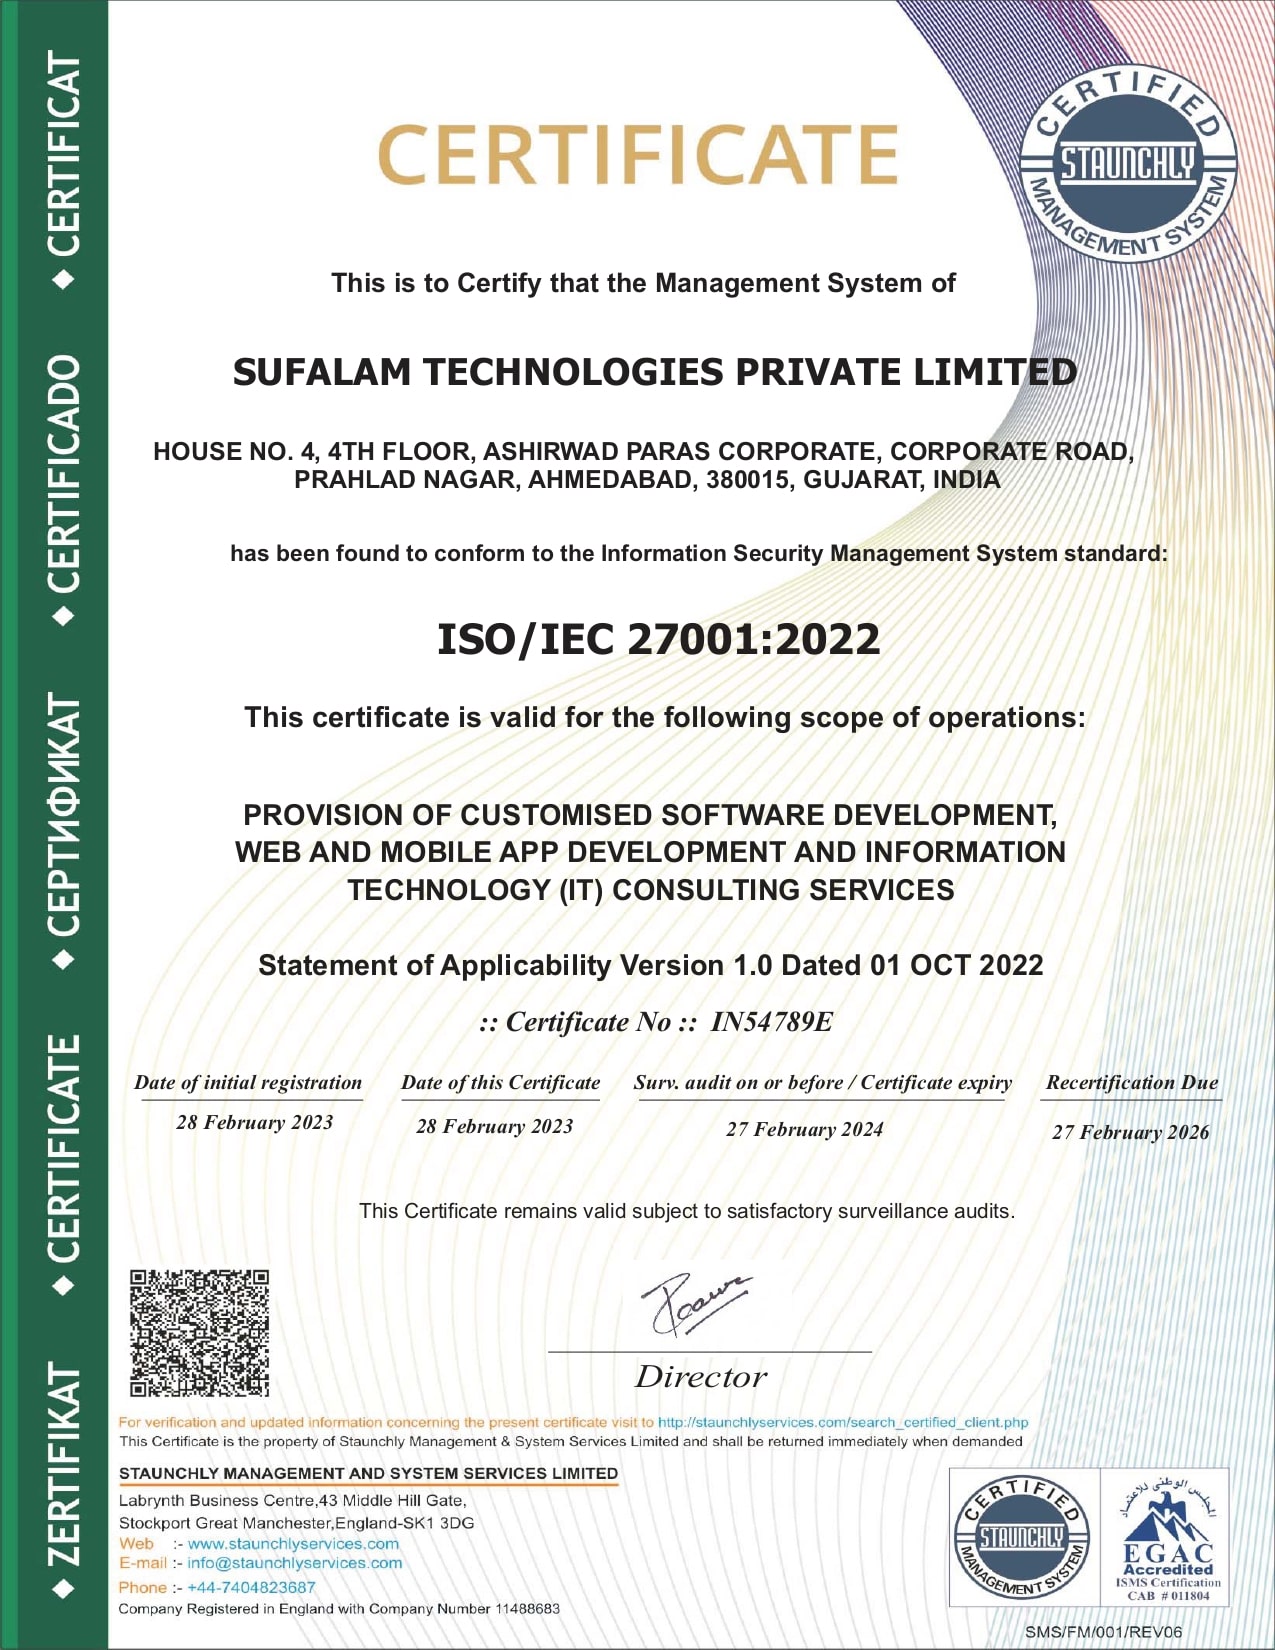 Sufalam is now iso 27001 certified